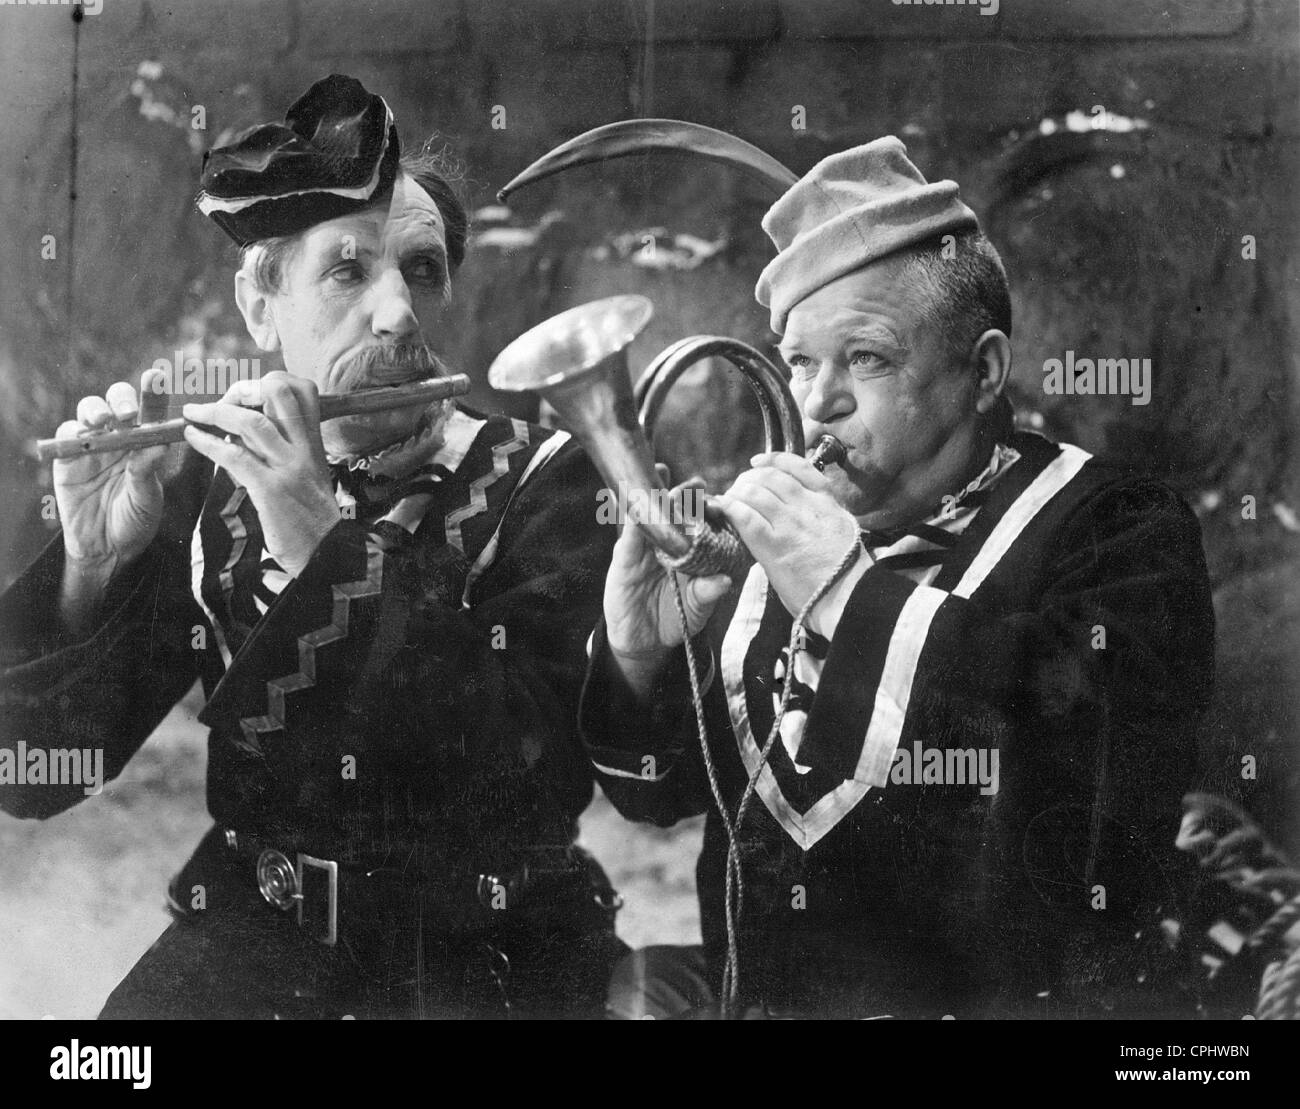 Carl Schenstrom and Harald Madsen in 'From the good old days' [I de gode, gamle dage], 1940 Stock Photo